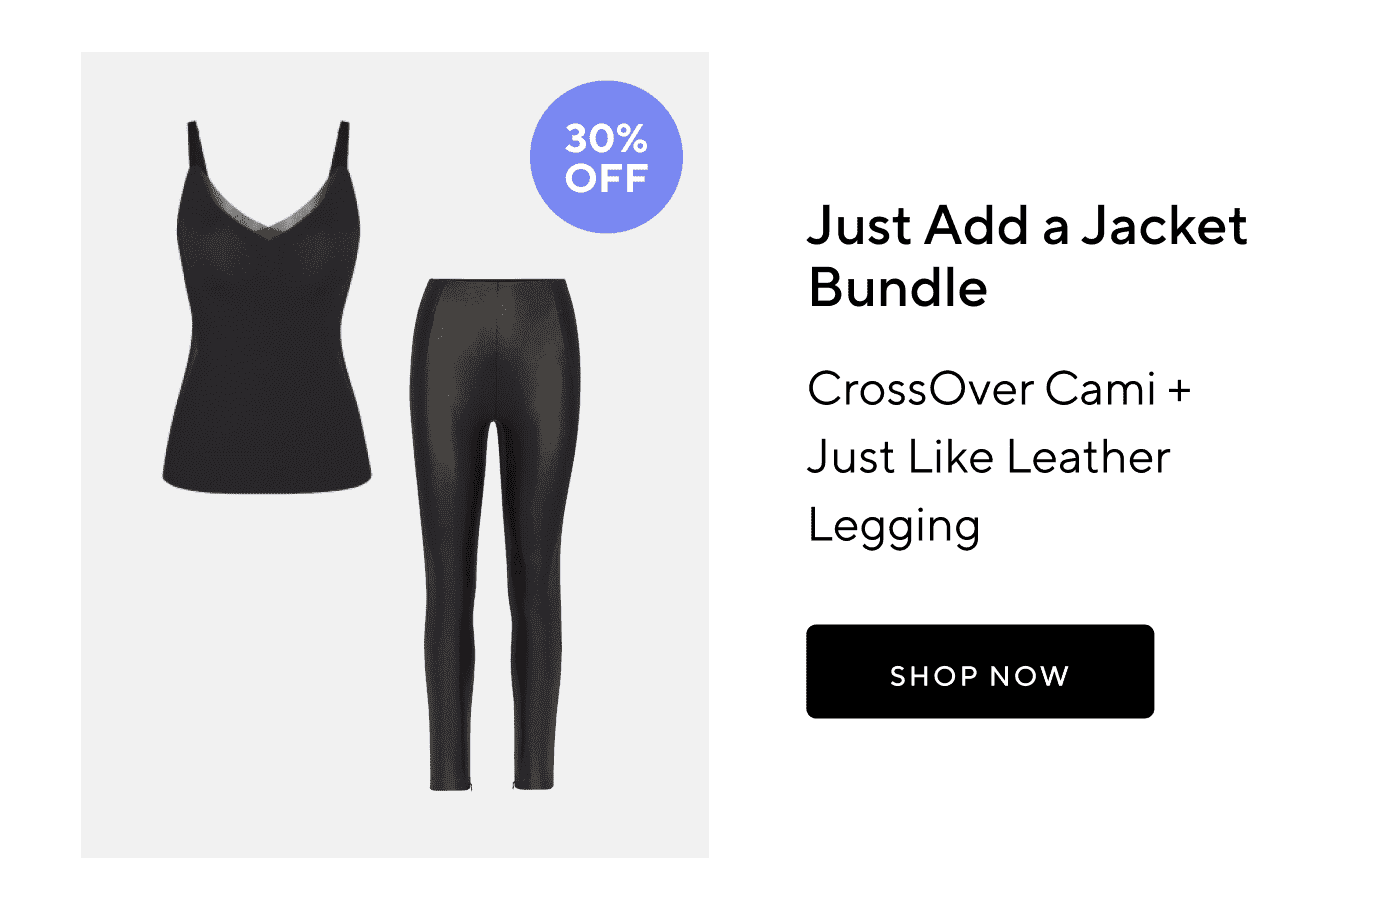 30% OFF | Just Add a Jacket Bundle | CrossOver Cami + Just Like Leather Legging | SHOP NOW 